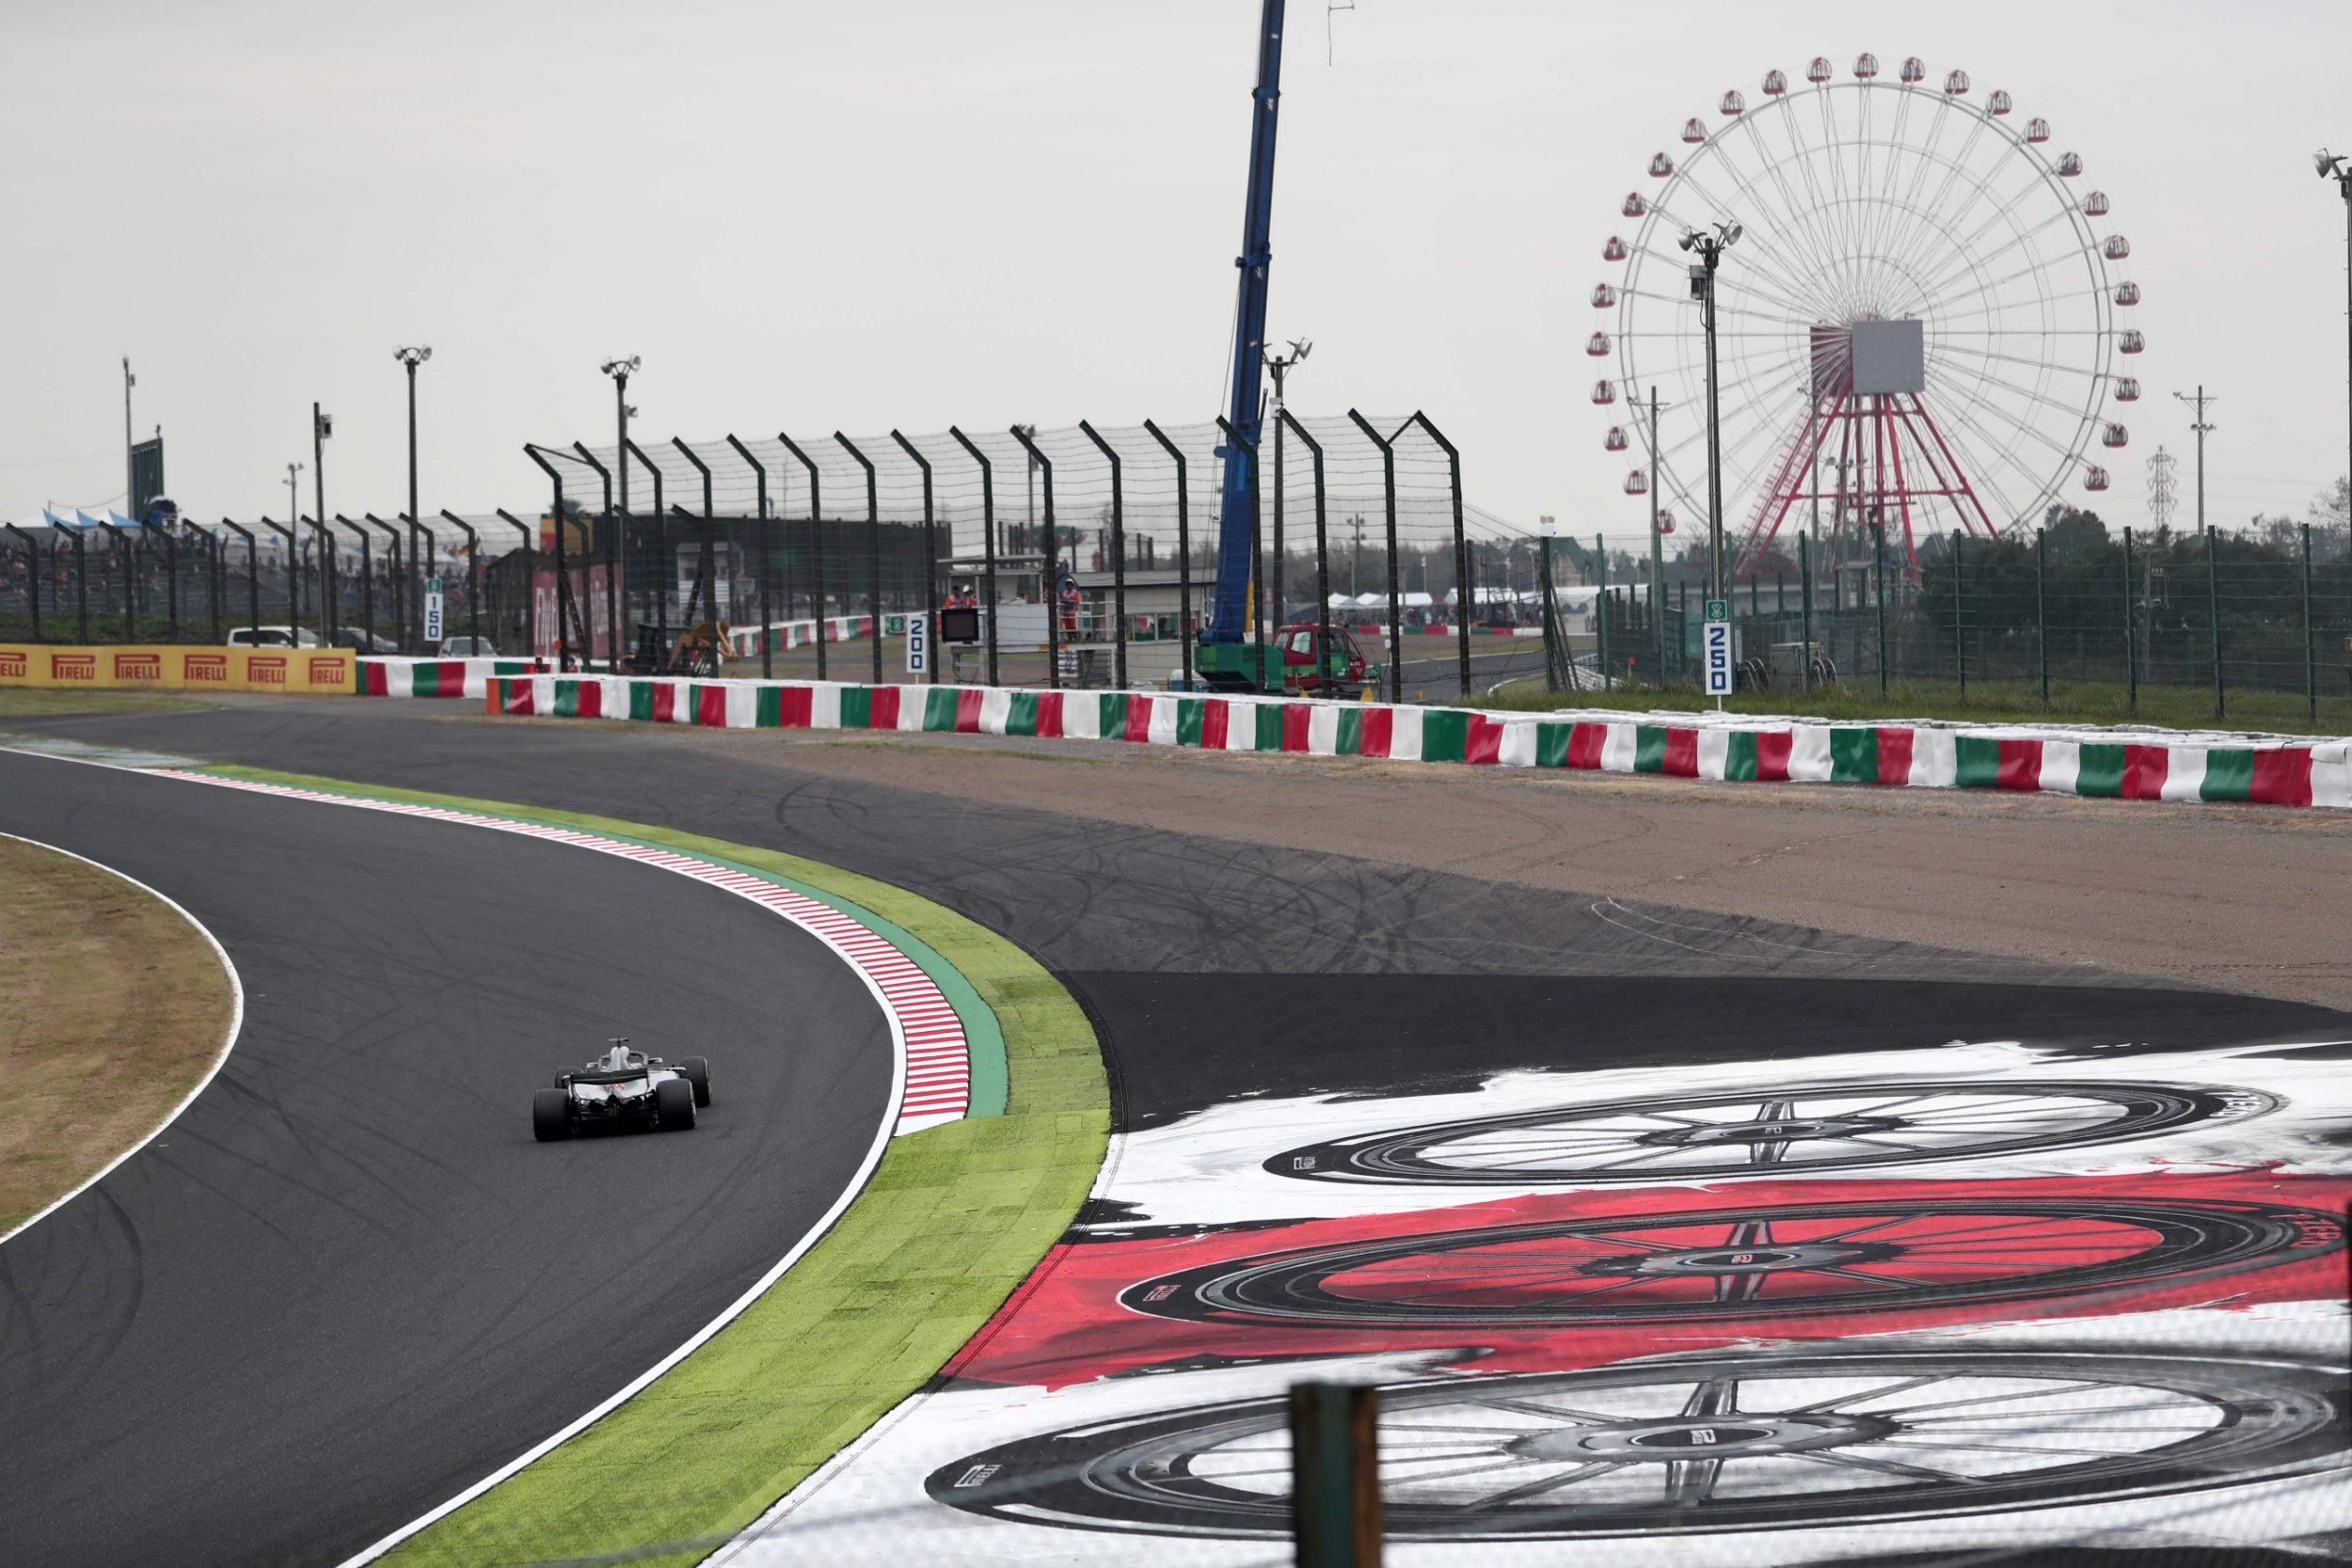 Suzuka's flowing first sector is the ultimate challenge for Hamilton